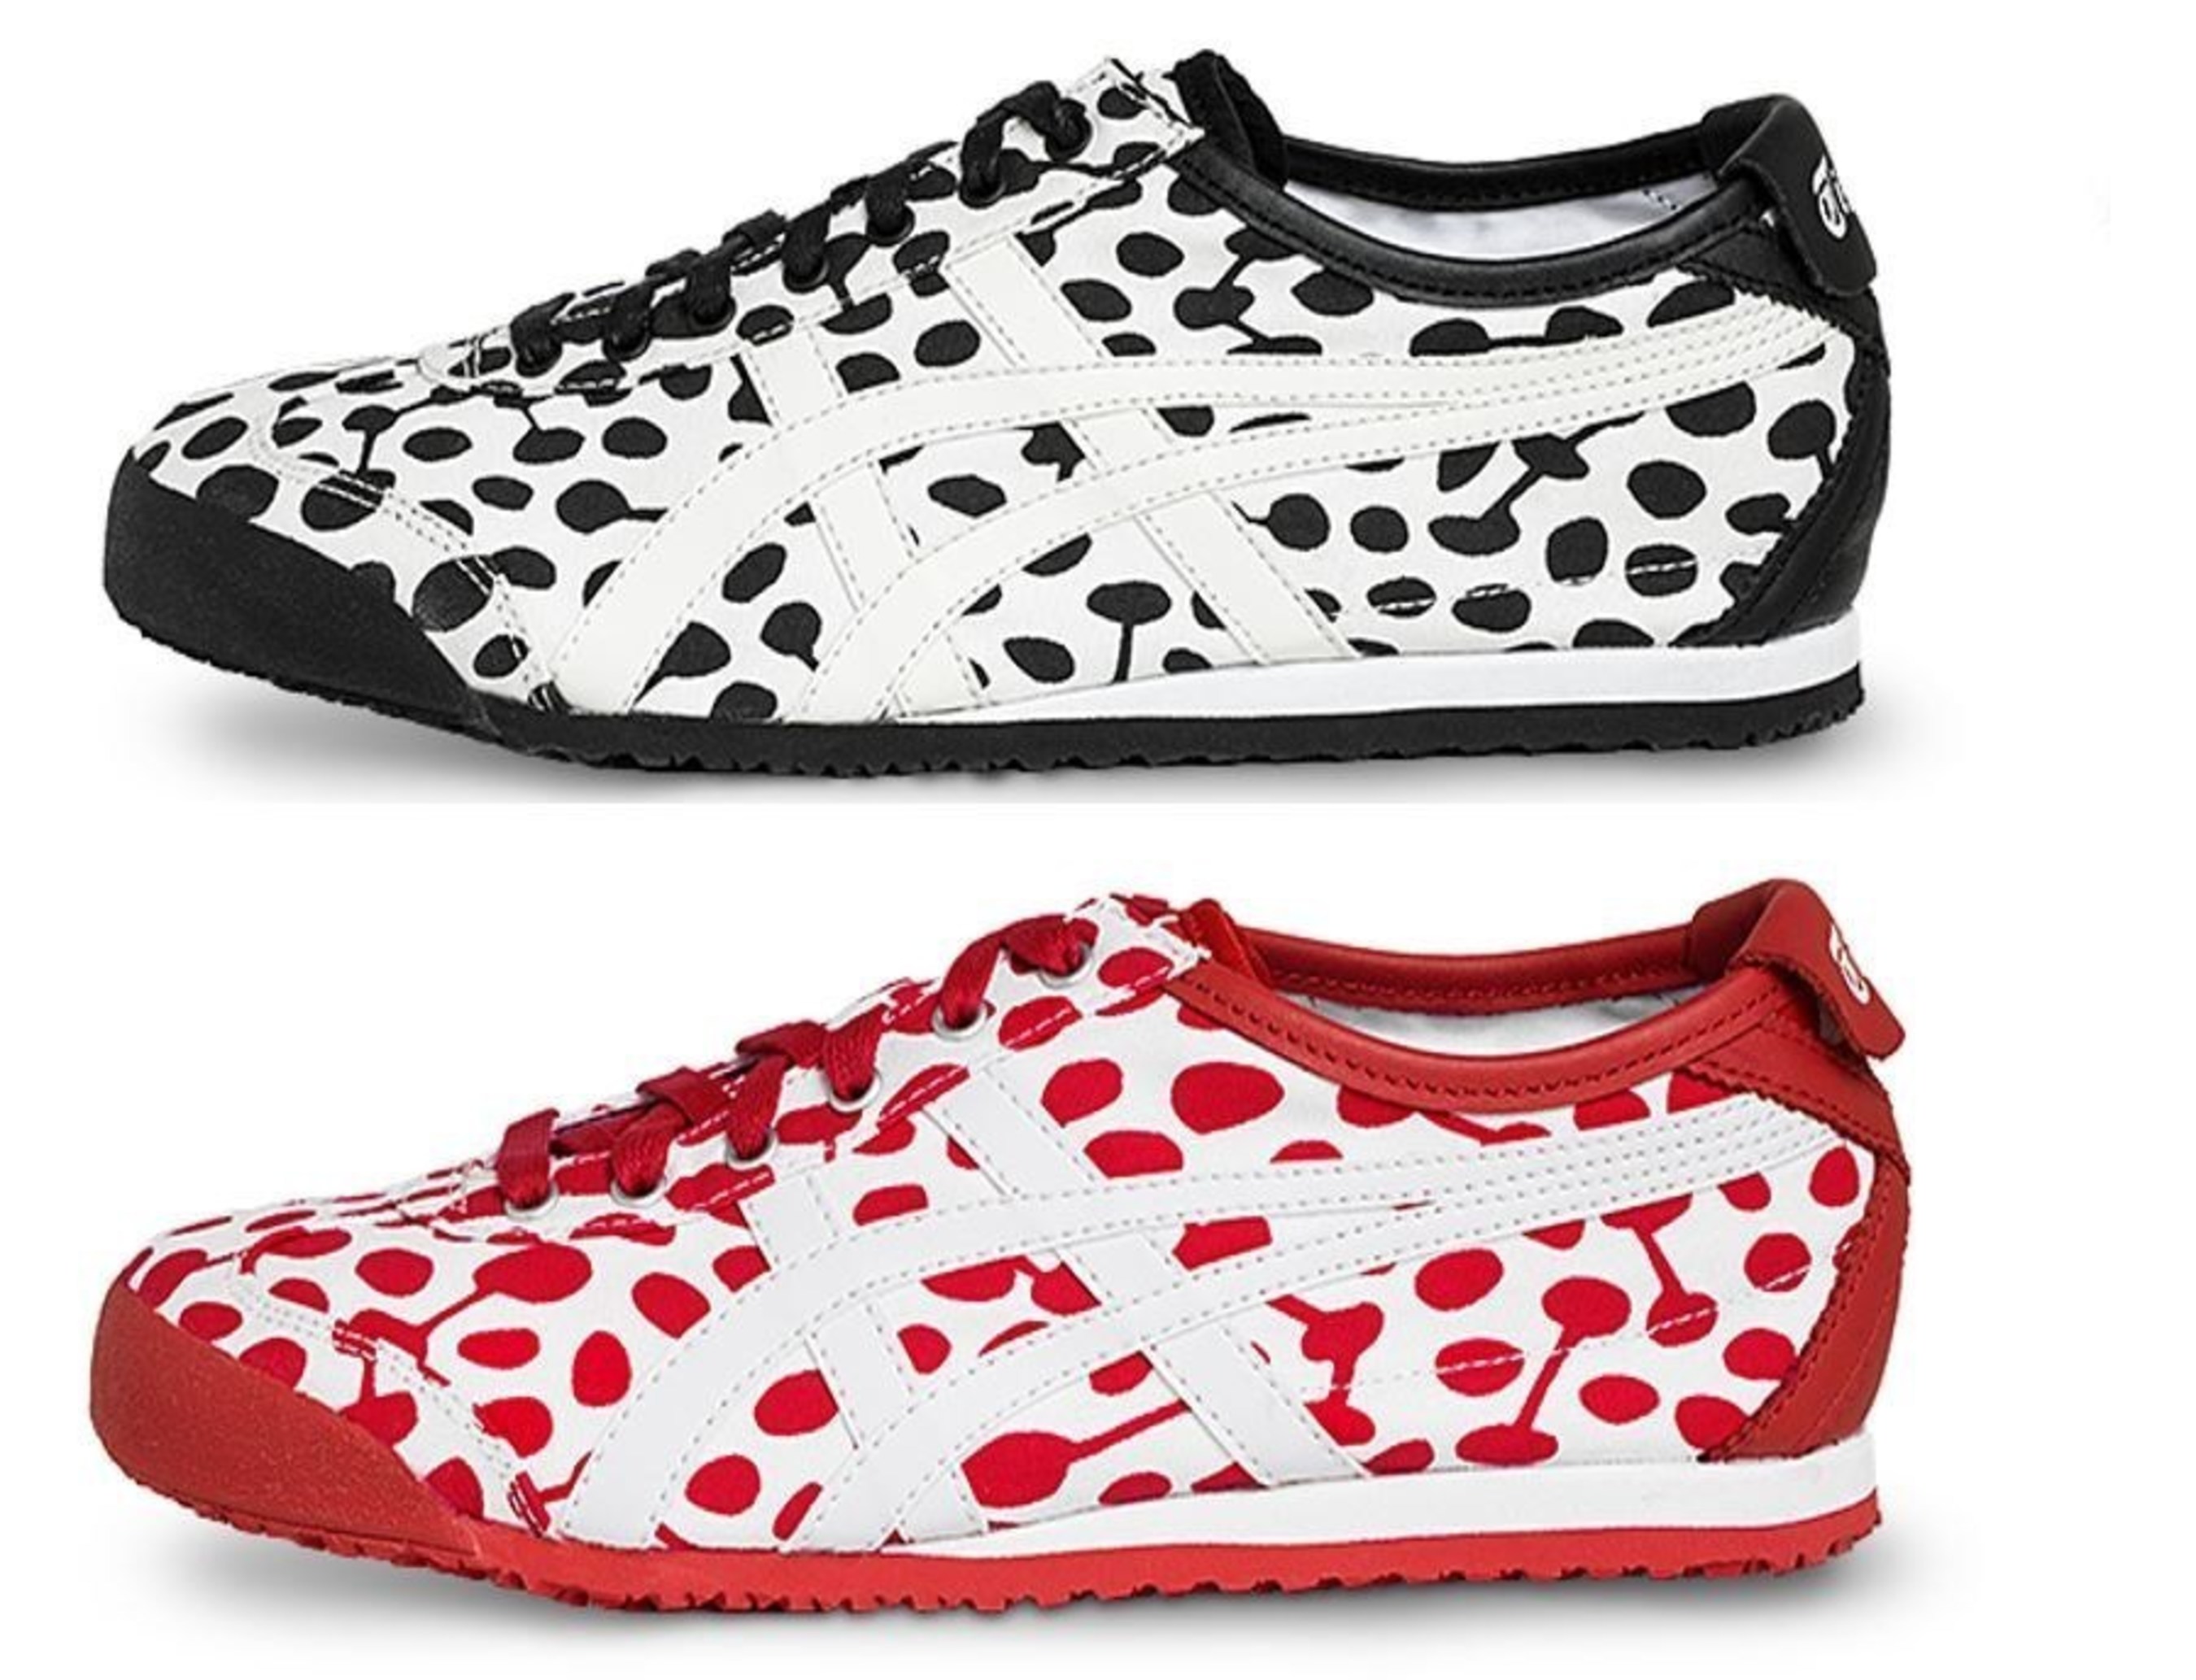 Onitsuka Tiger® To Debut Capsule Collection In Collaboration With